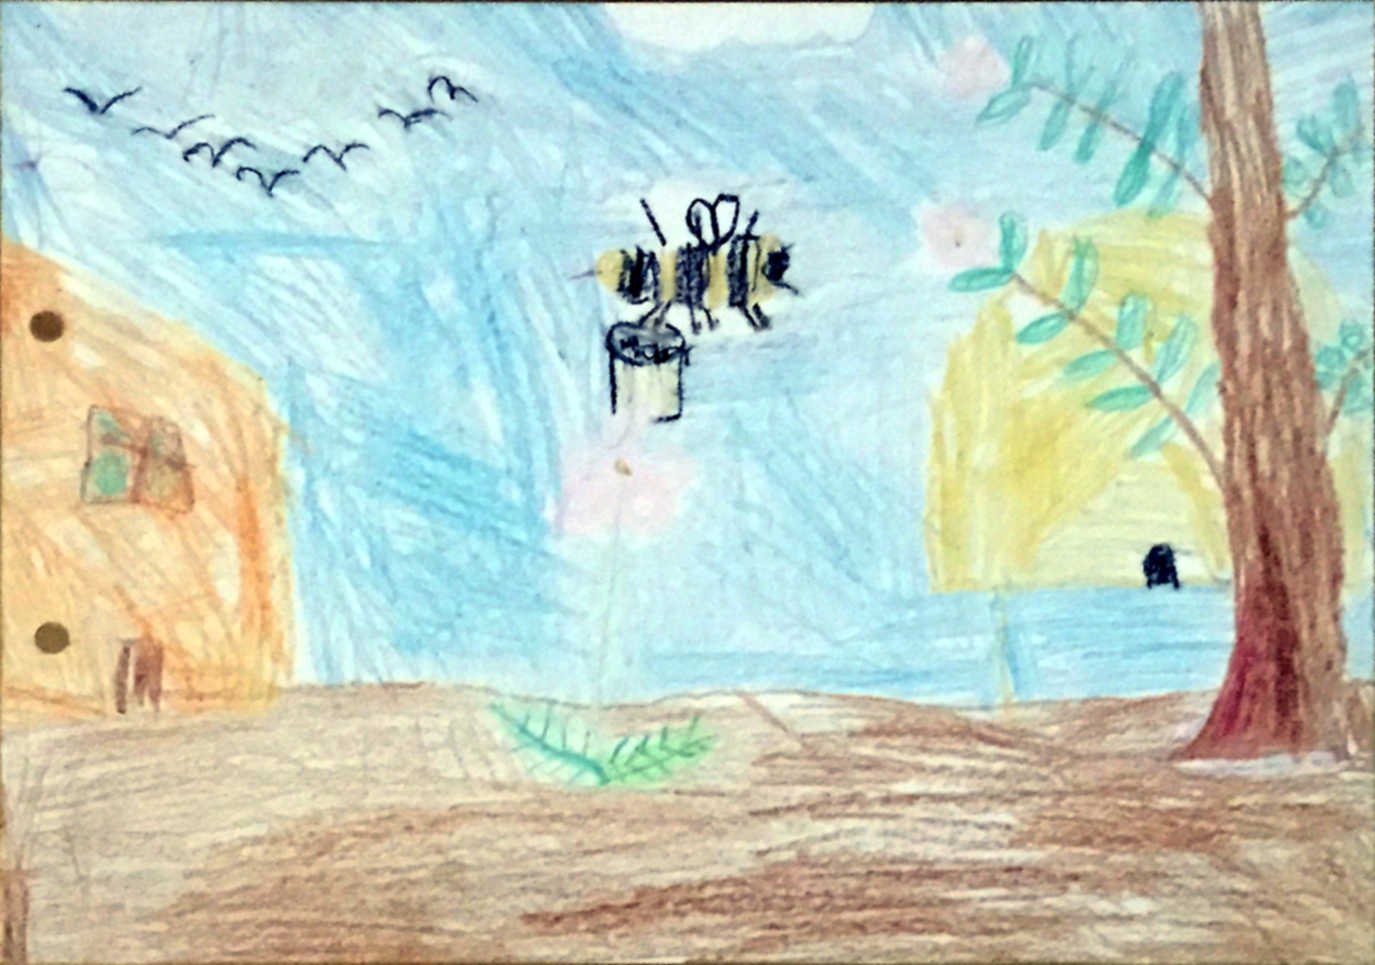 A scene during the day.  The ground is brown, with no grass or pavement or water nearby.  In the middle is a pink flower, and above it is a bee carrying some sort of container.  On the left is an orange building.  On the right is a yellow structure which is supposed to be a beehive; in front of it is a tree.  There's also a flock of birds in a V formation.